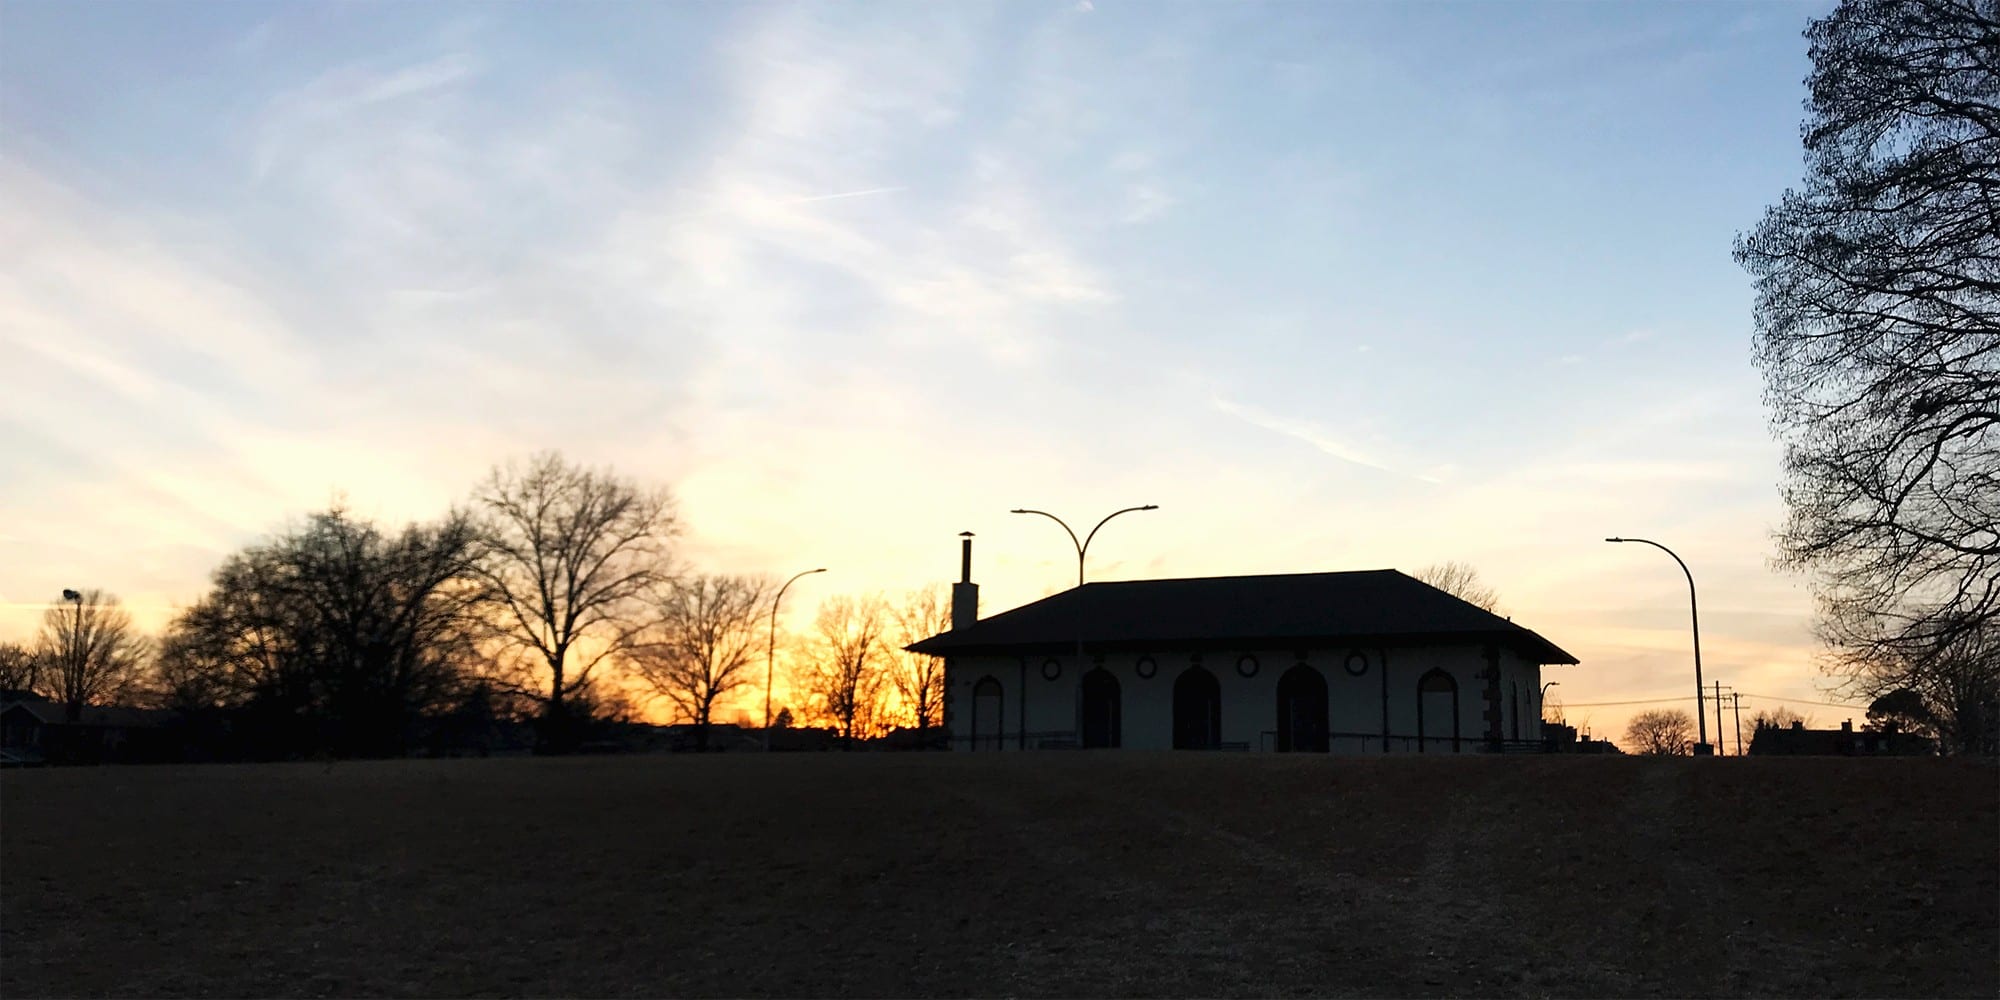 The Marquette Park Field House at sunset. Photo by Nick Findley.